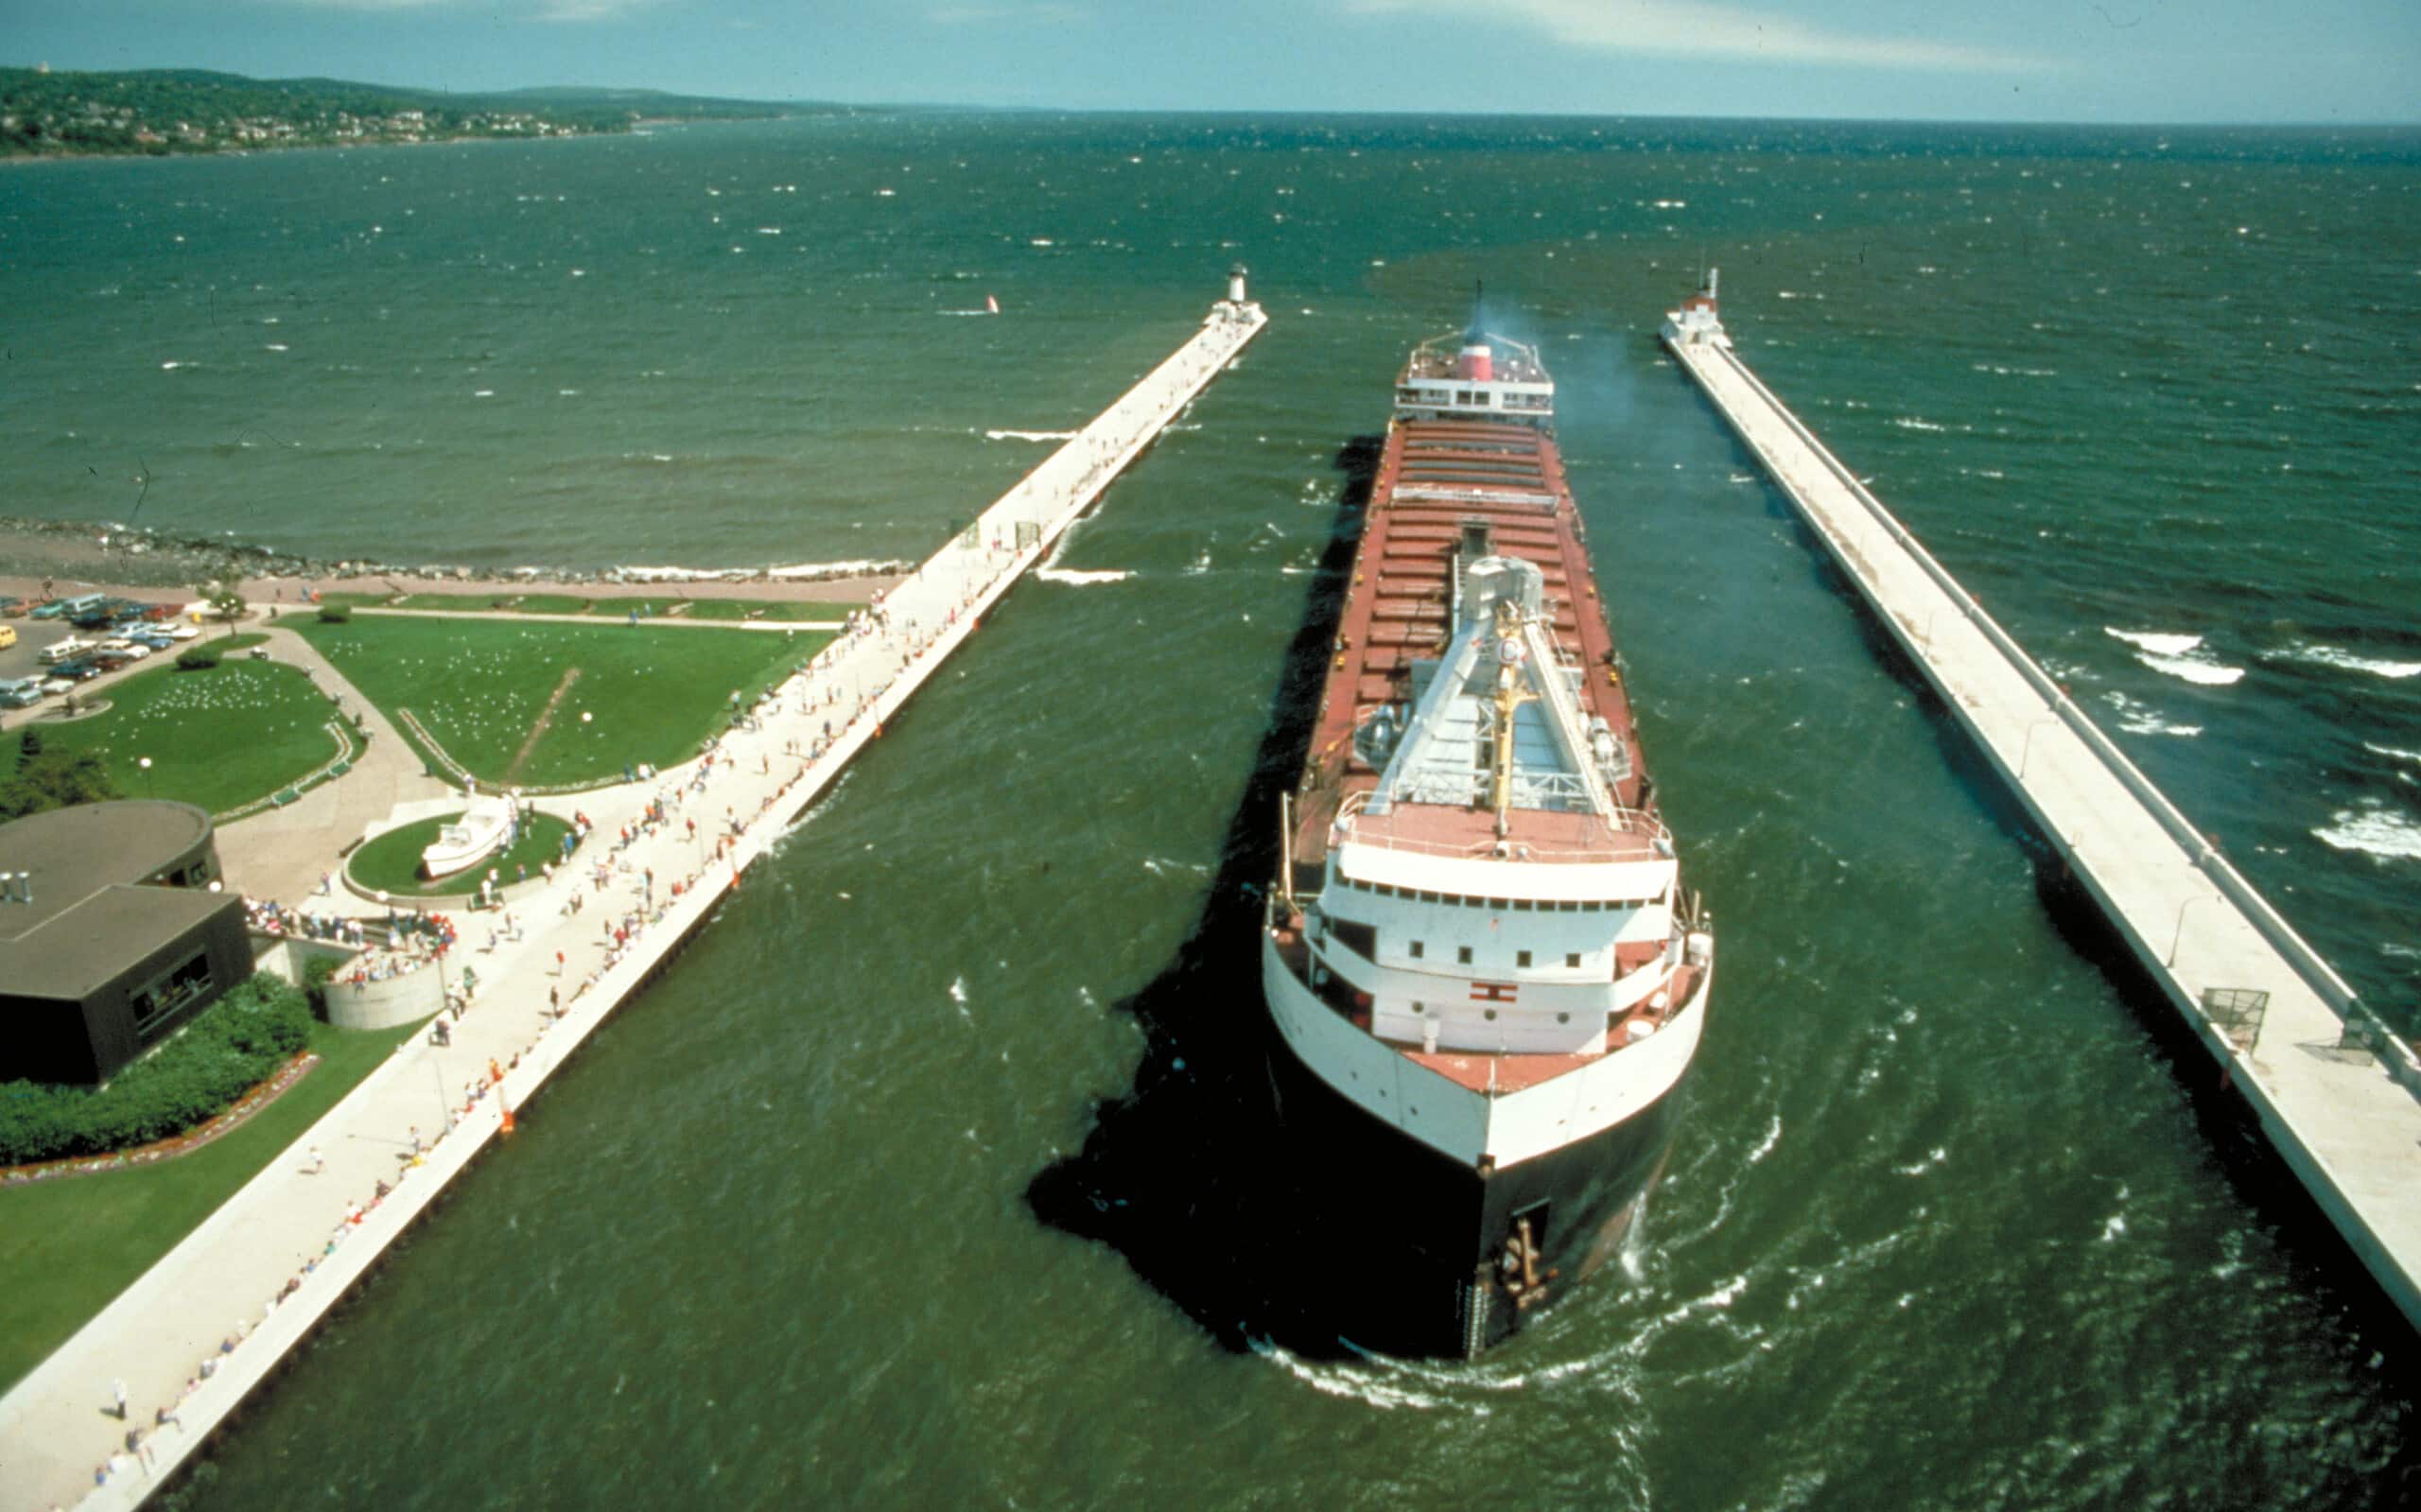 An unidentified lake freighter of the Canadian Steamship Lines entering Duluth Ship Canal in Duluth, Minnesota